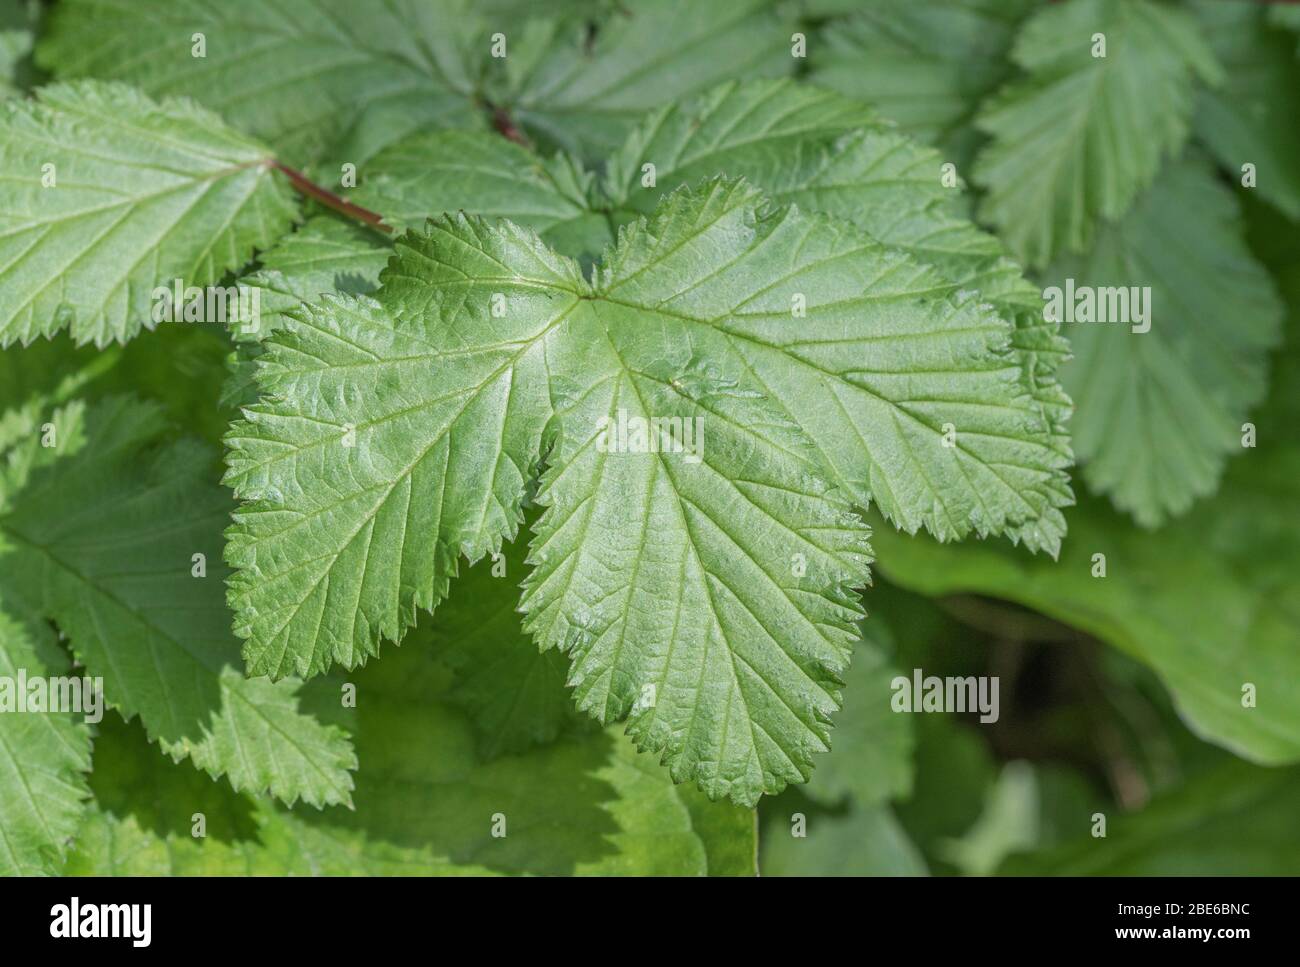 Spring foliage / leaves of Meadowsweet / Filipendula ulmaria which has analgesic properties (contains aspirin-type compounds) and likes moist ground. Stock Photo